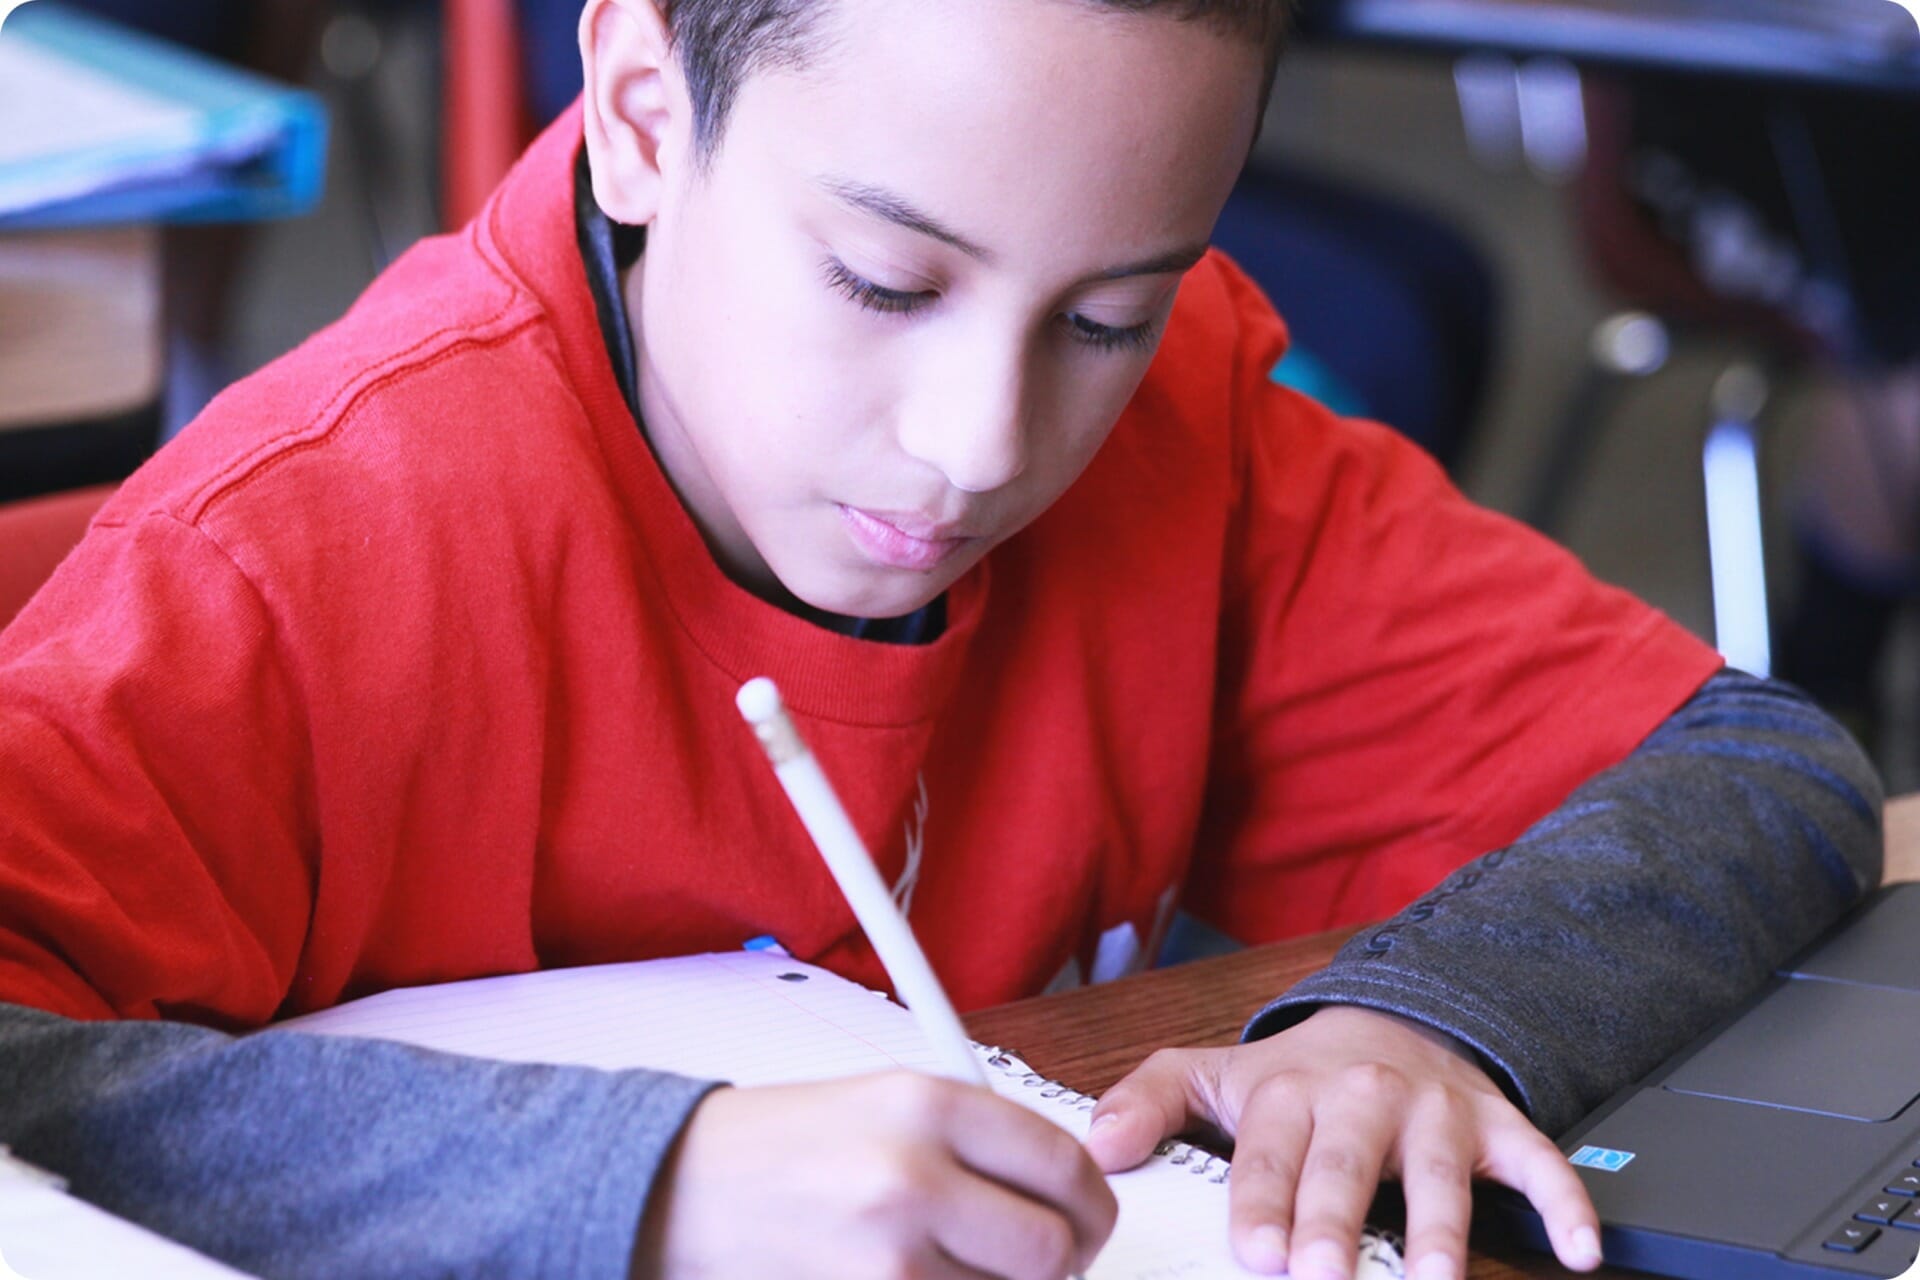 A young boy in a red hoodie writes in a notebook while using a laptop in a math classroom setting.